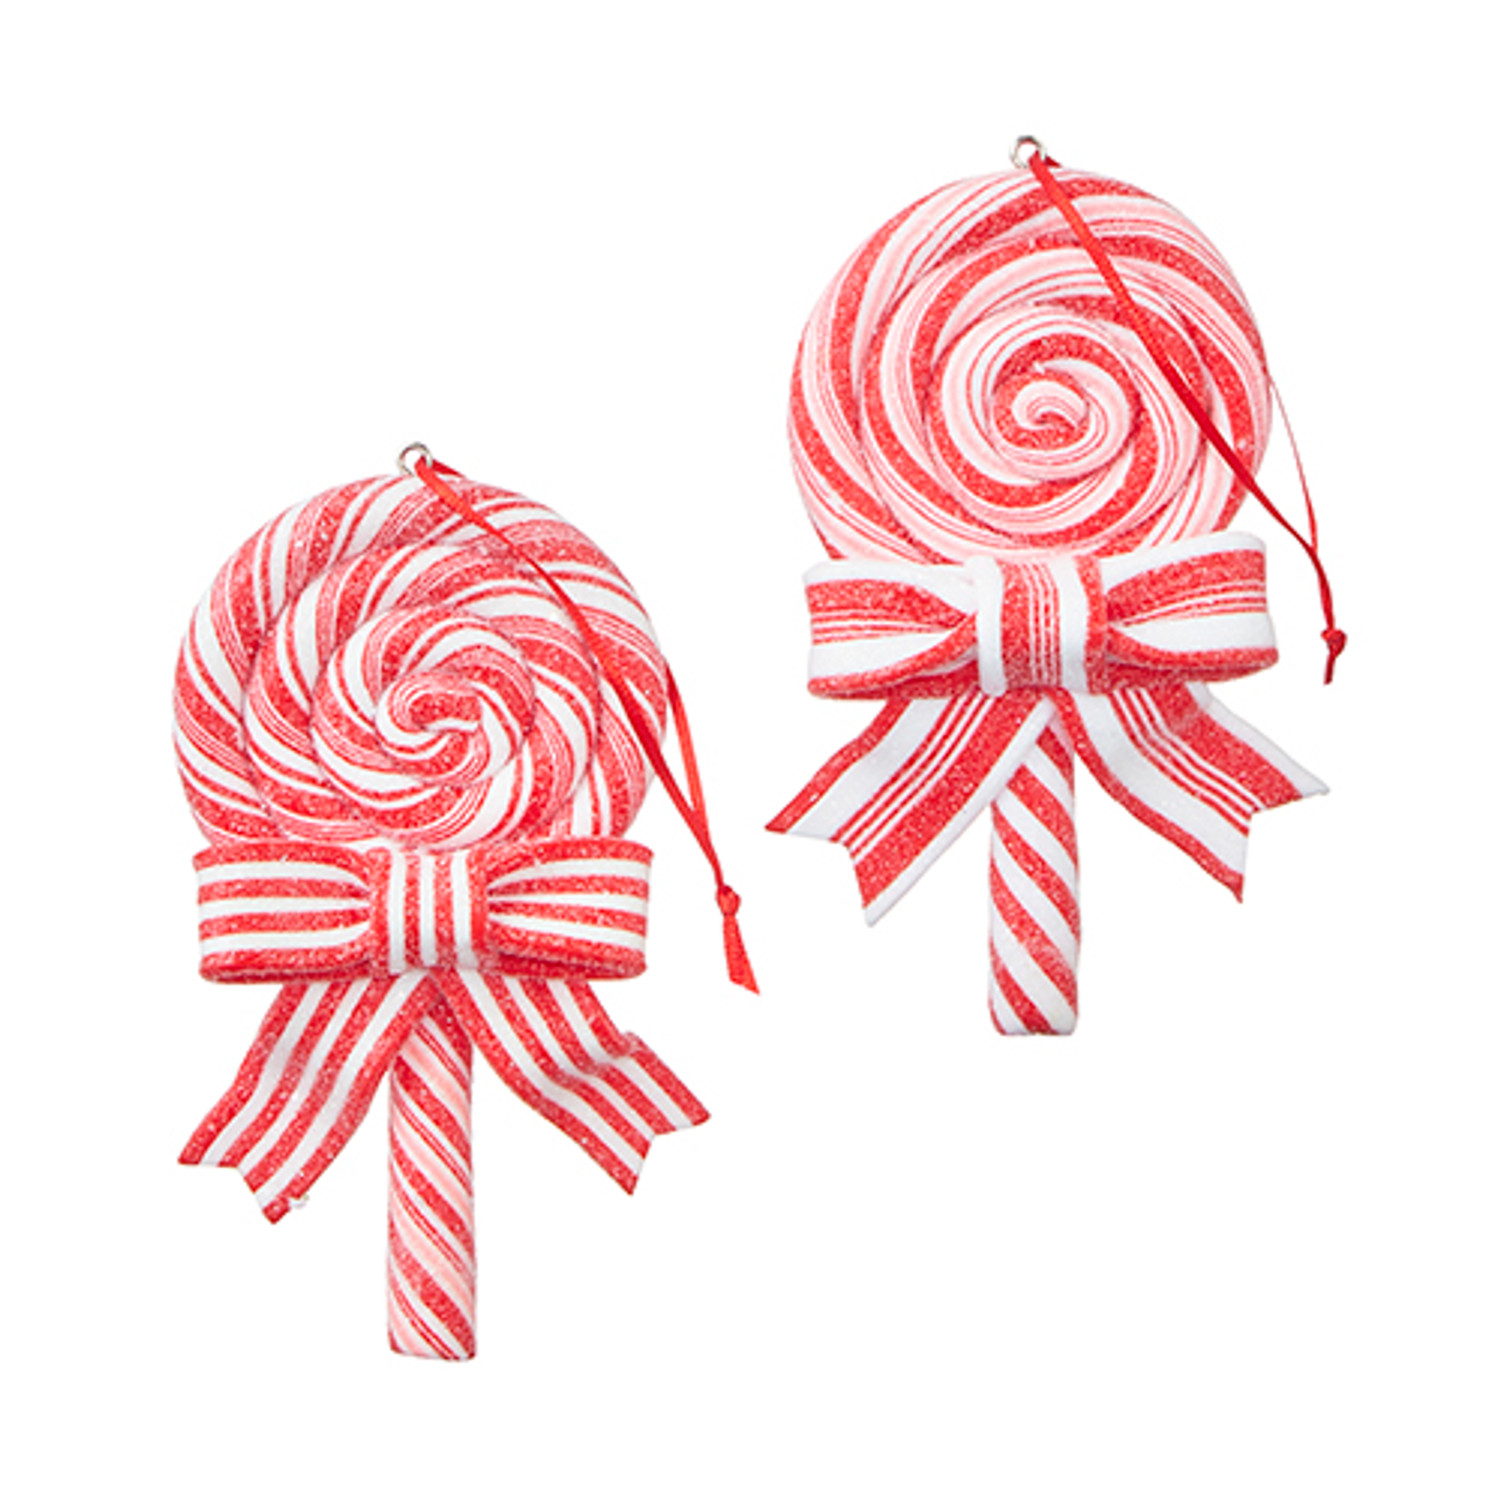 RAZ 4 Red and White Ribbon Candy Ornament - set of 3